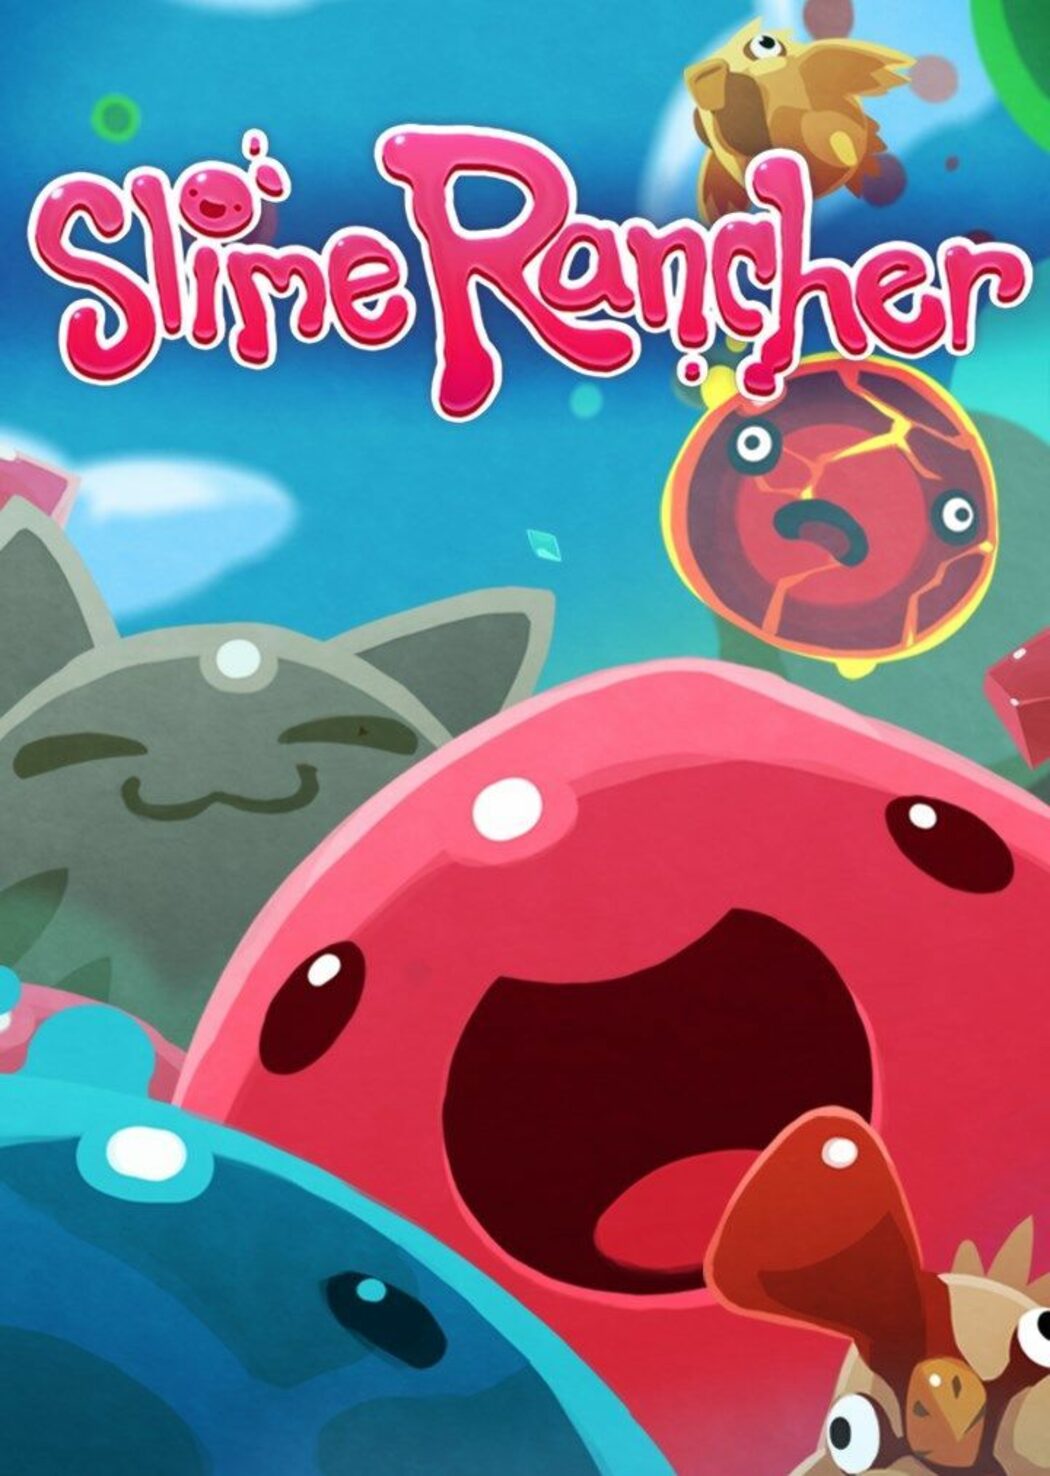 slime rancher nintendo switch release date